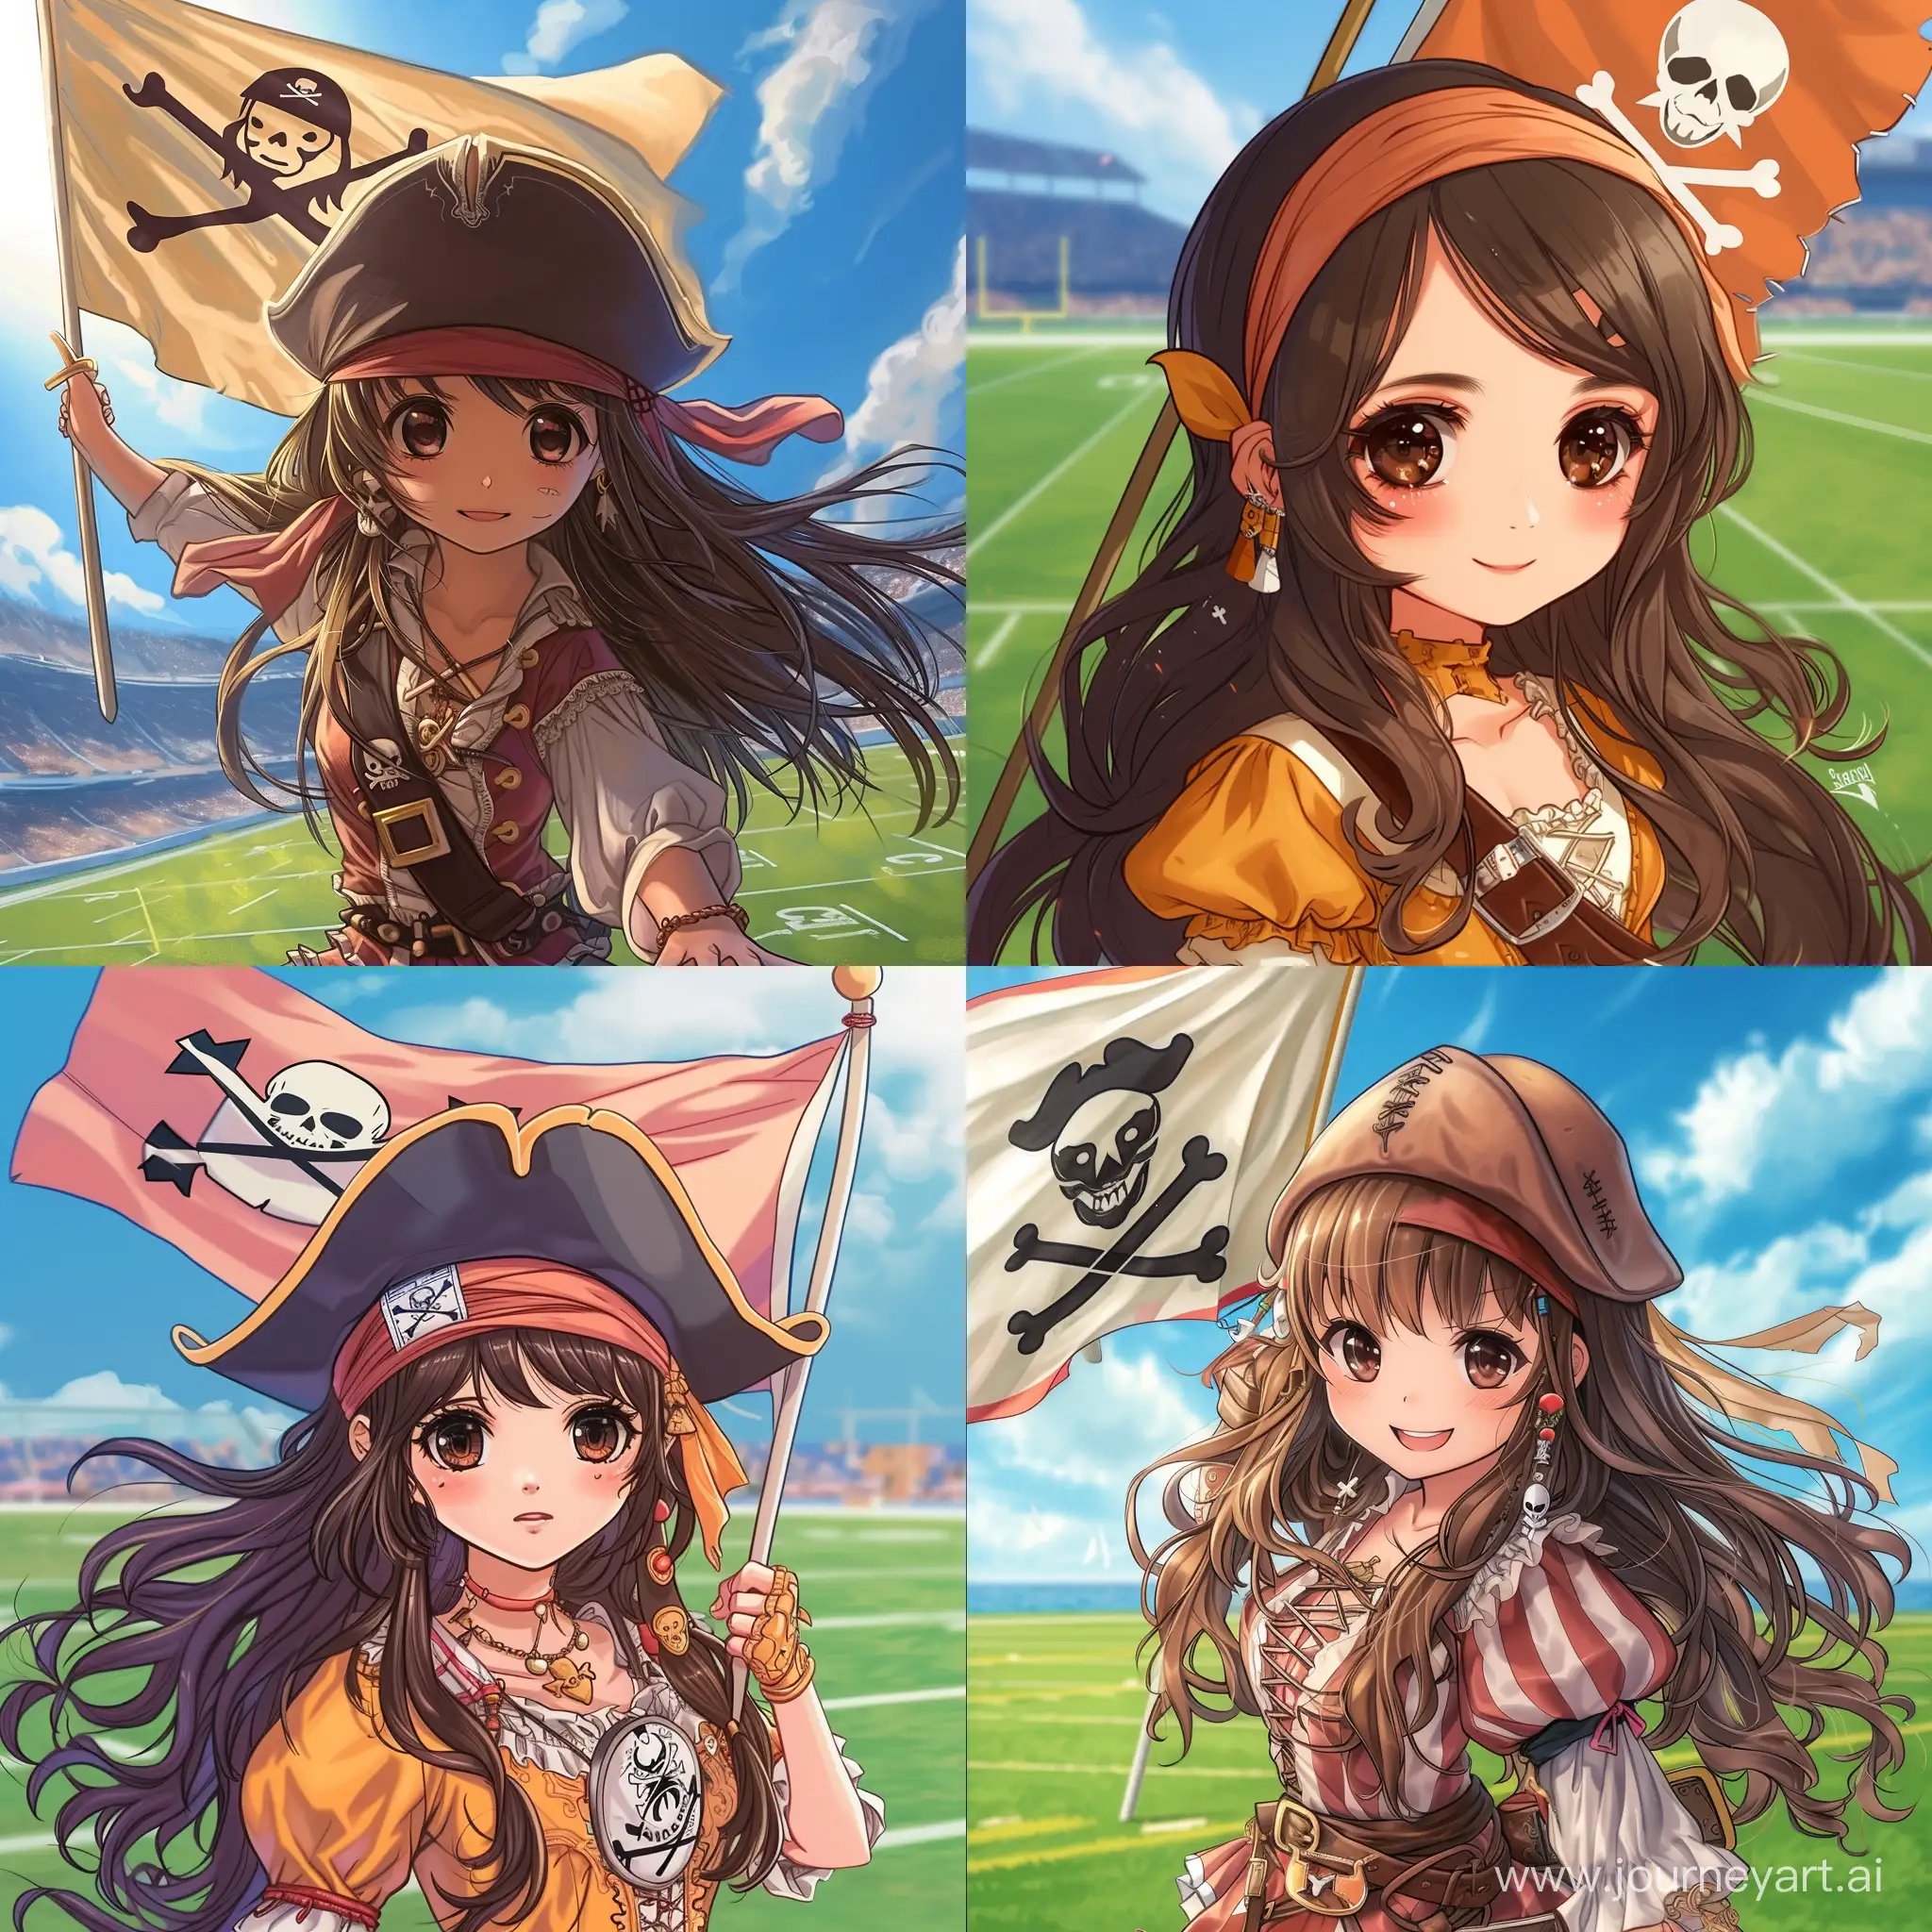 A girl, with long brown hair and eyes, on a football field, has flag with a pirate symbol on it, in cute pirate costume, cartoon style, illustration